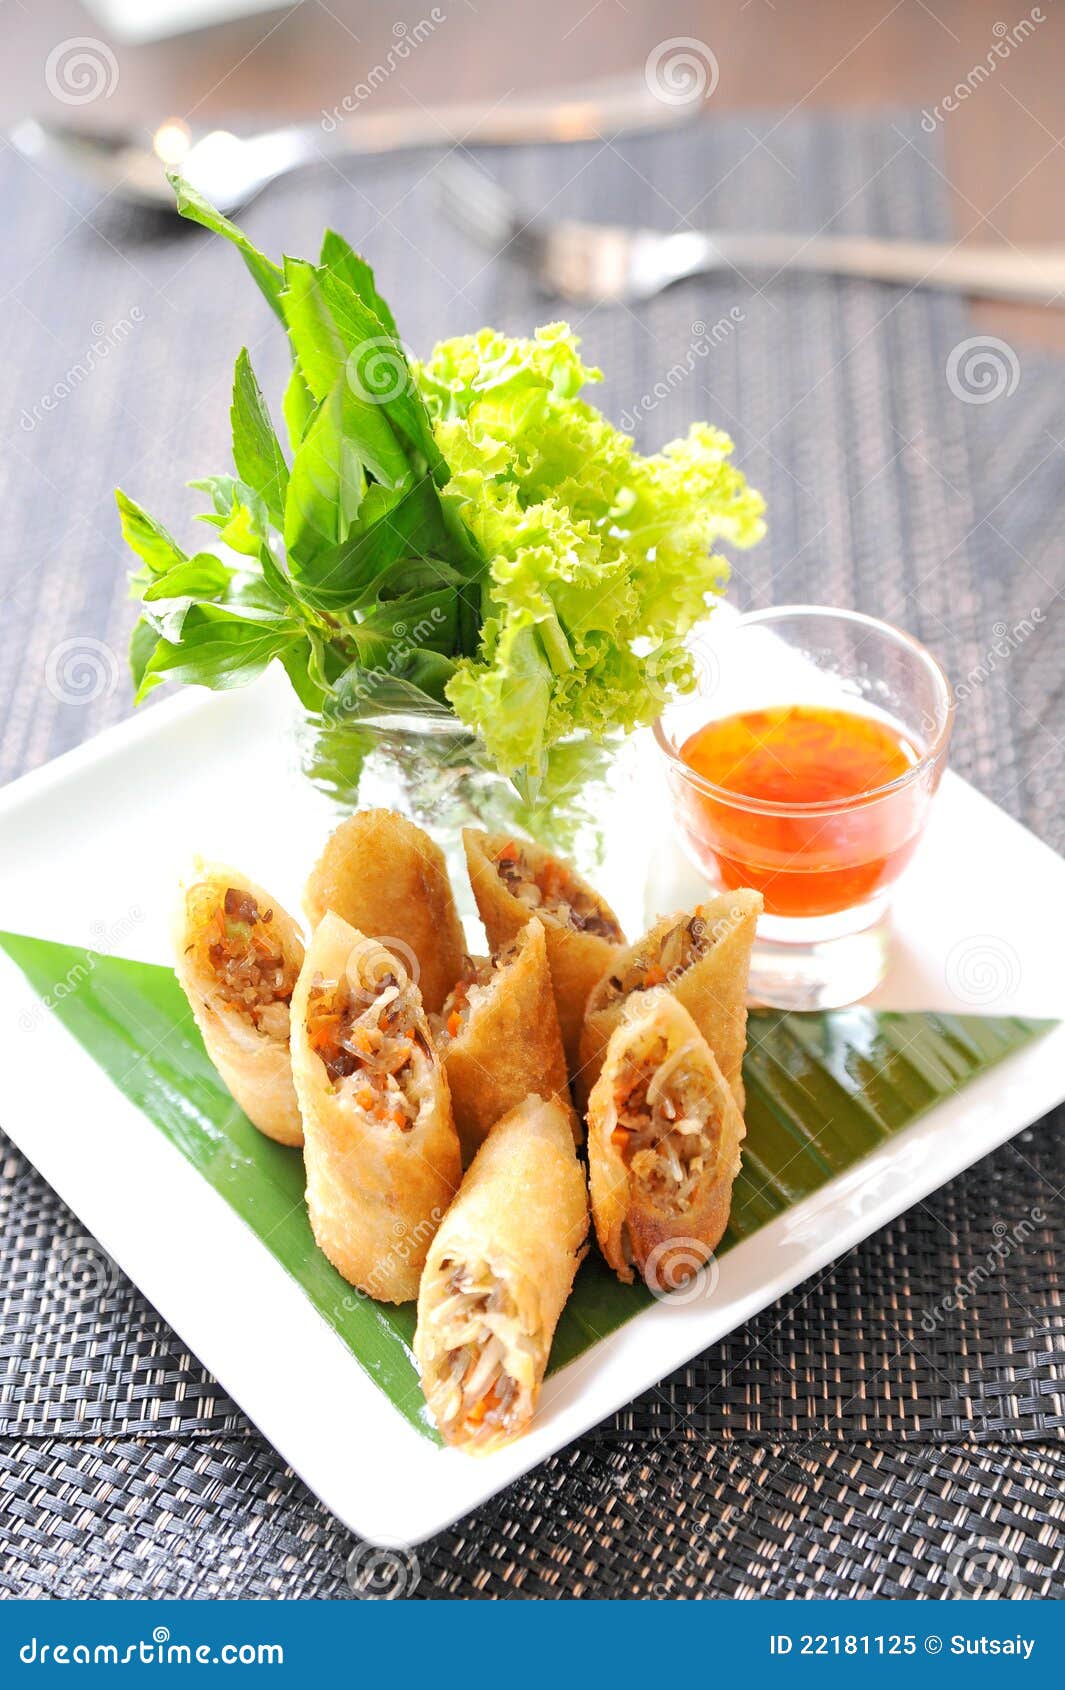 Fried Chinese Traditional Spring Rolls Stock Image - Image of healthy ...